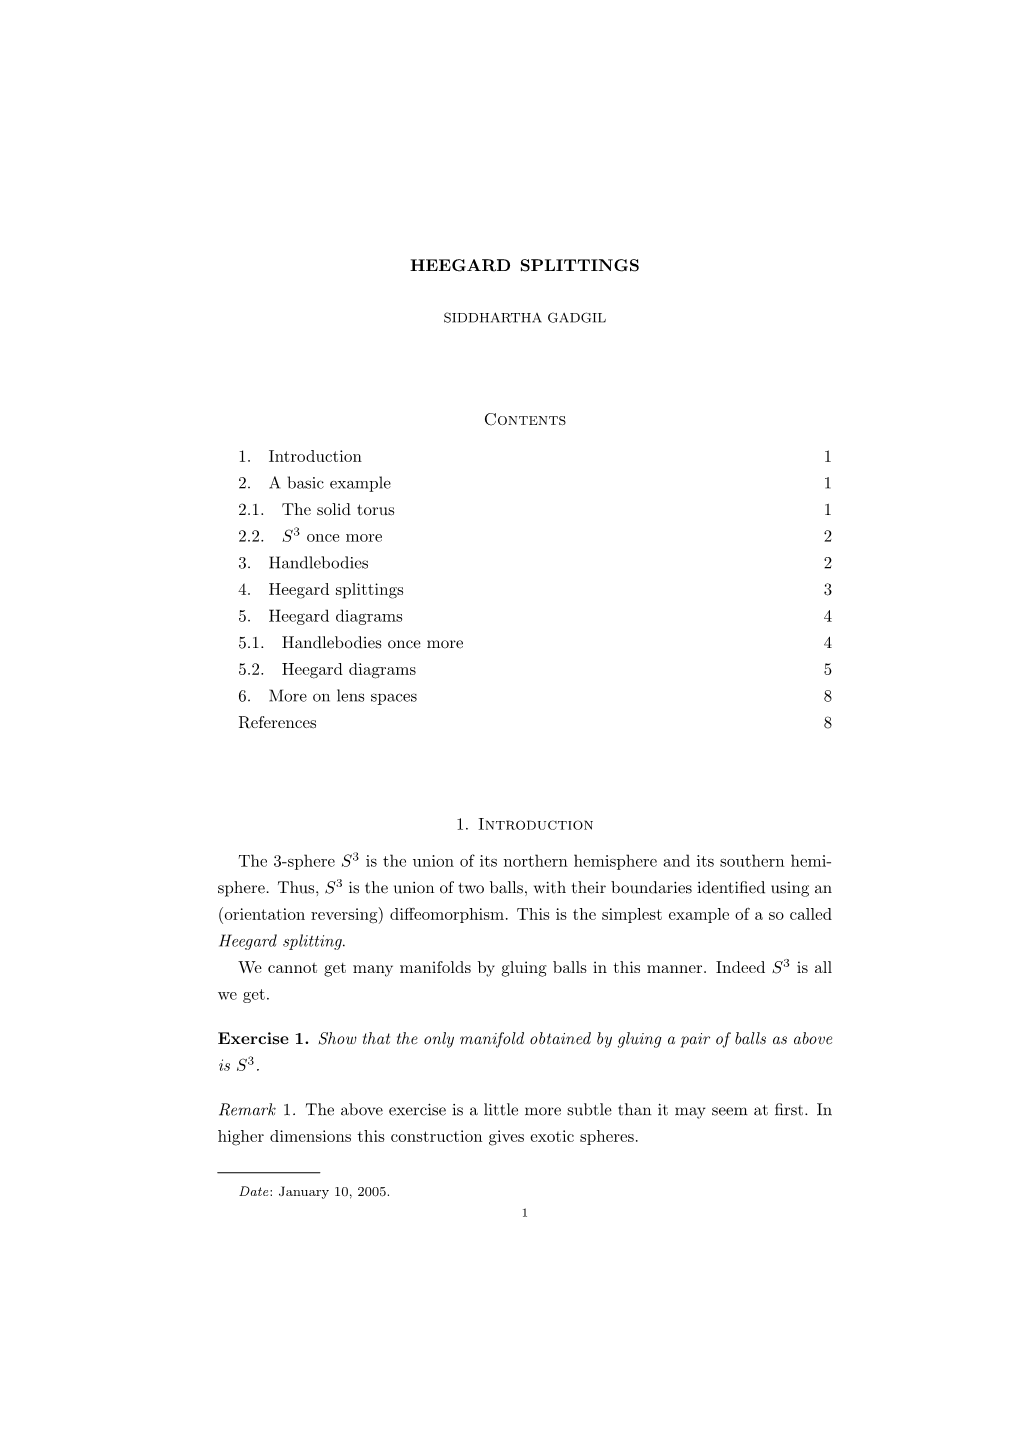 HEEGARD SPLITTINGS Contents 1. Introduction 1 2. a Basic Example 1